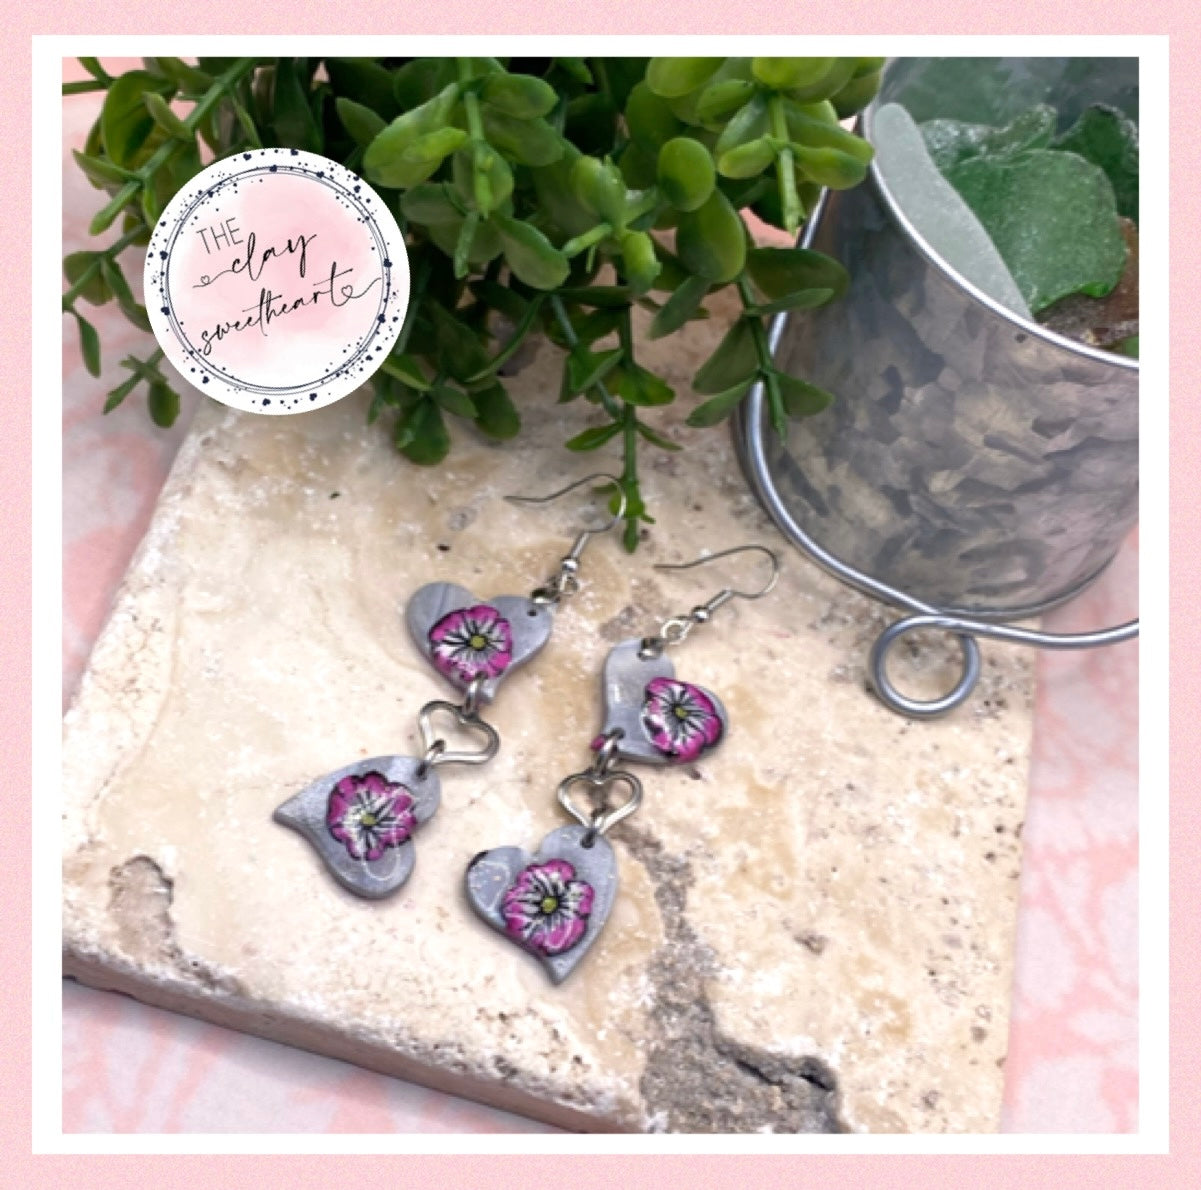 1603 silver with pink flowers polymer clay heart earrings